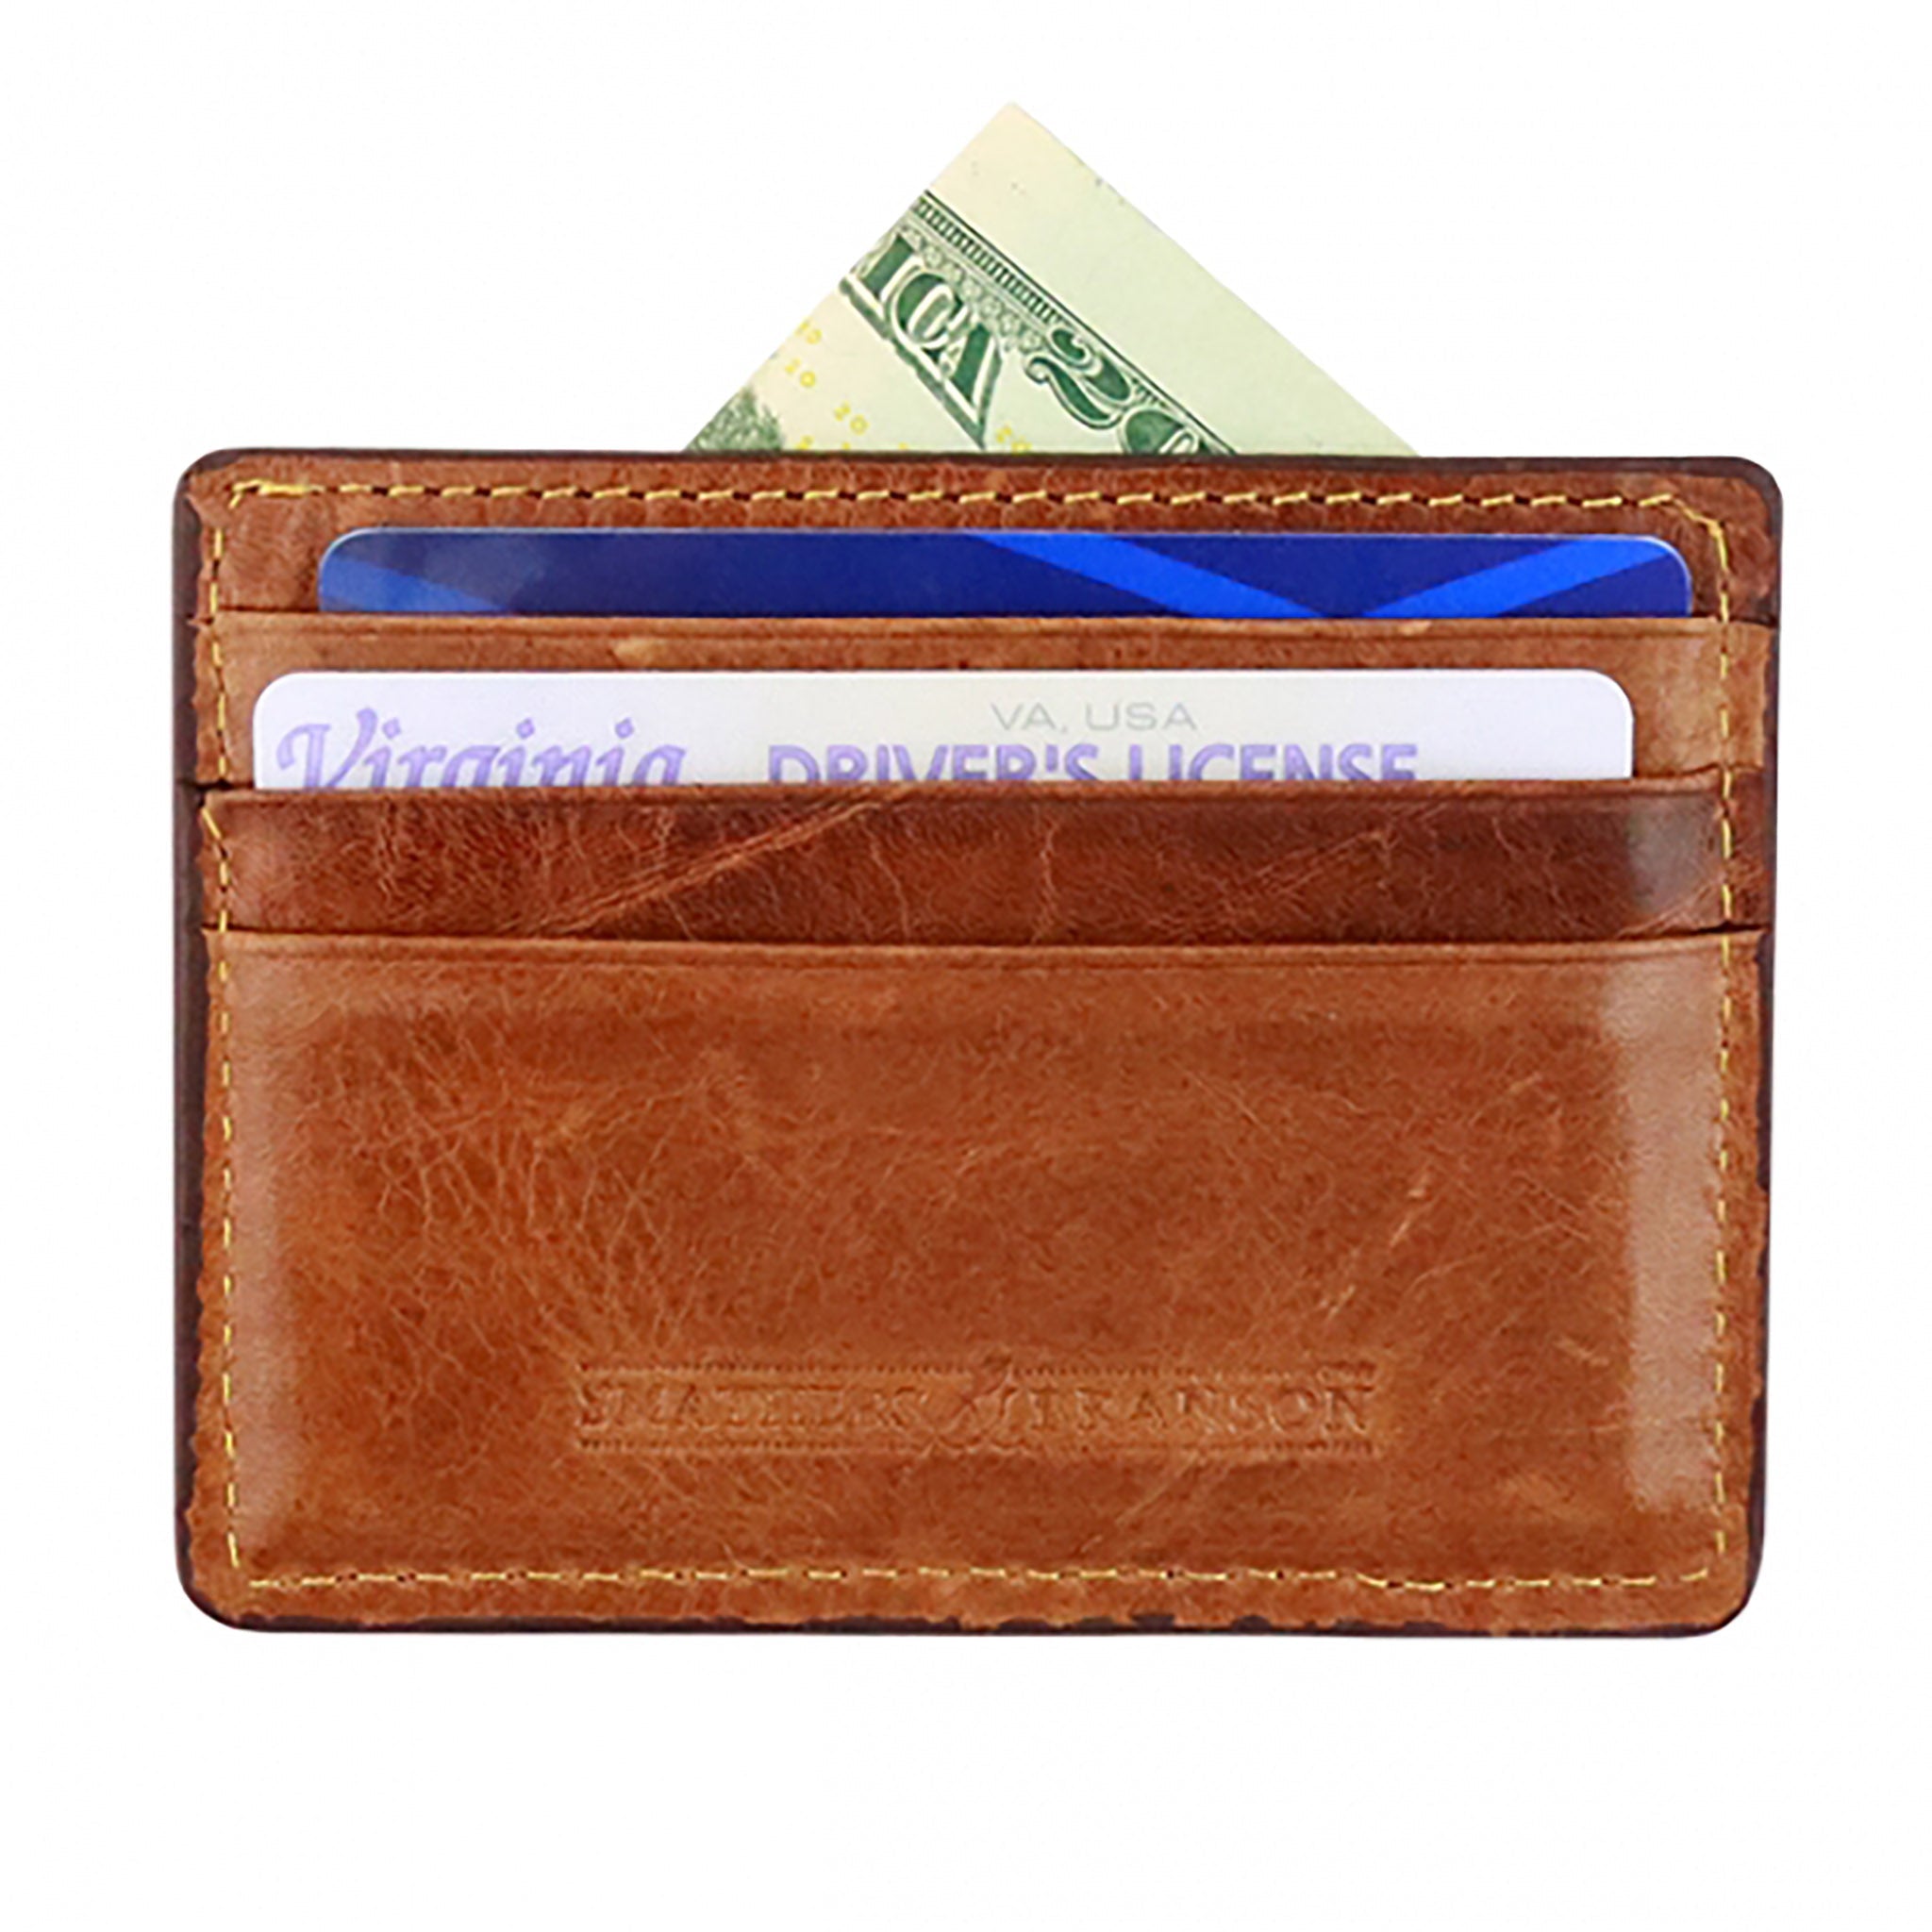 Wofford Card Wallet (Gold)